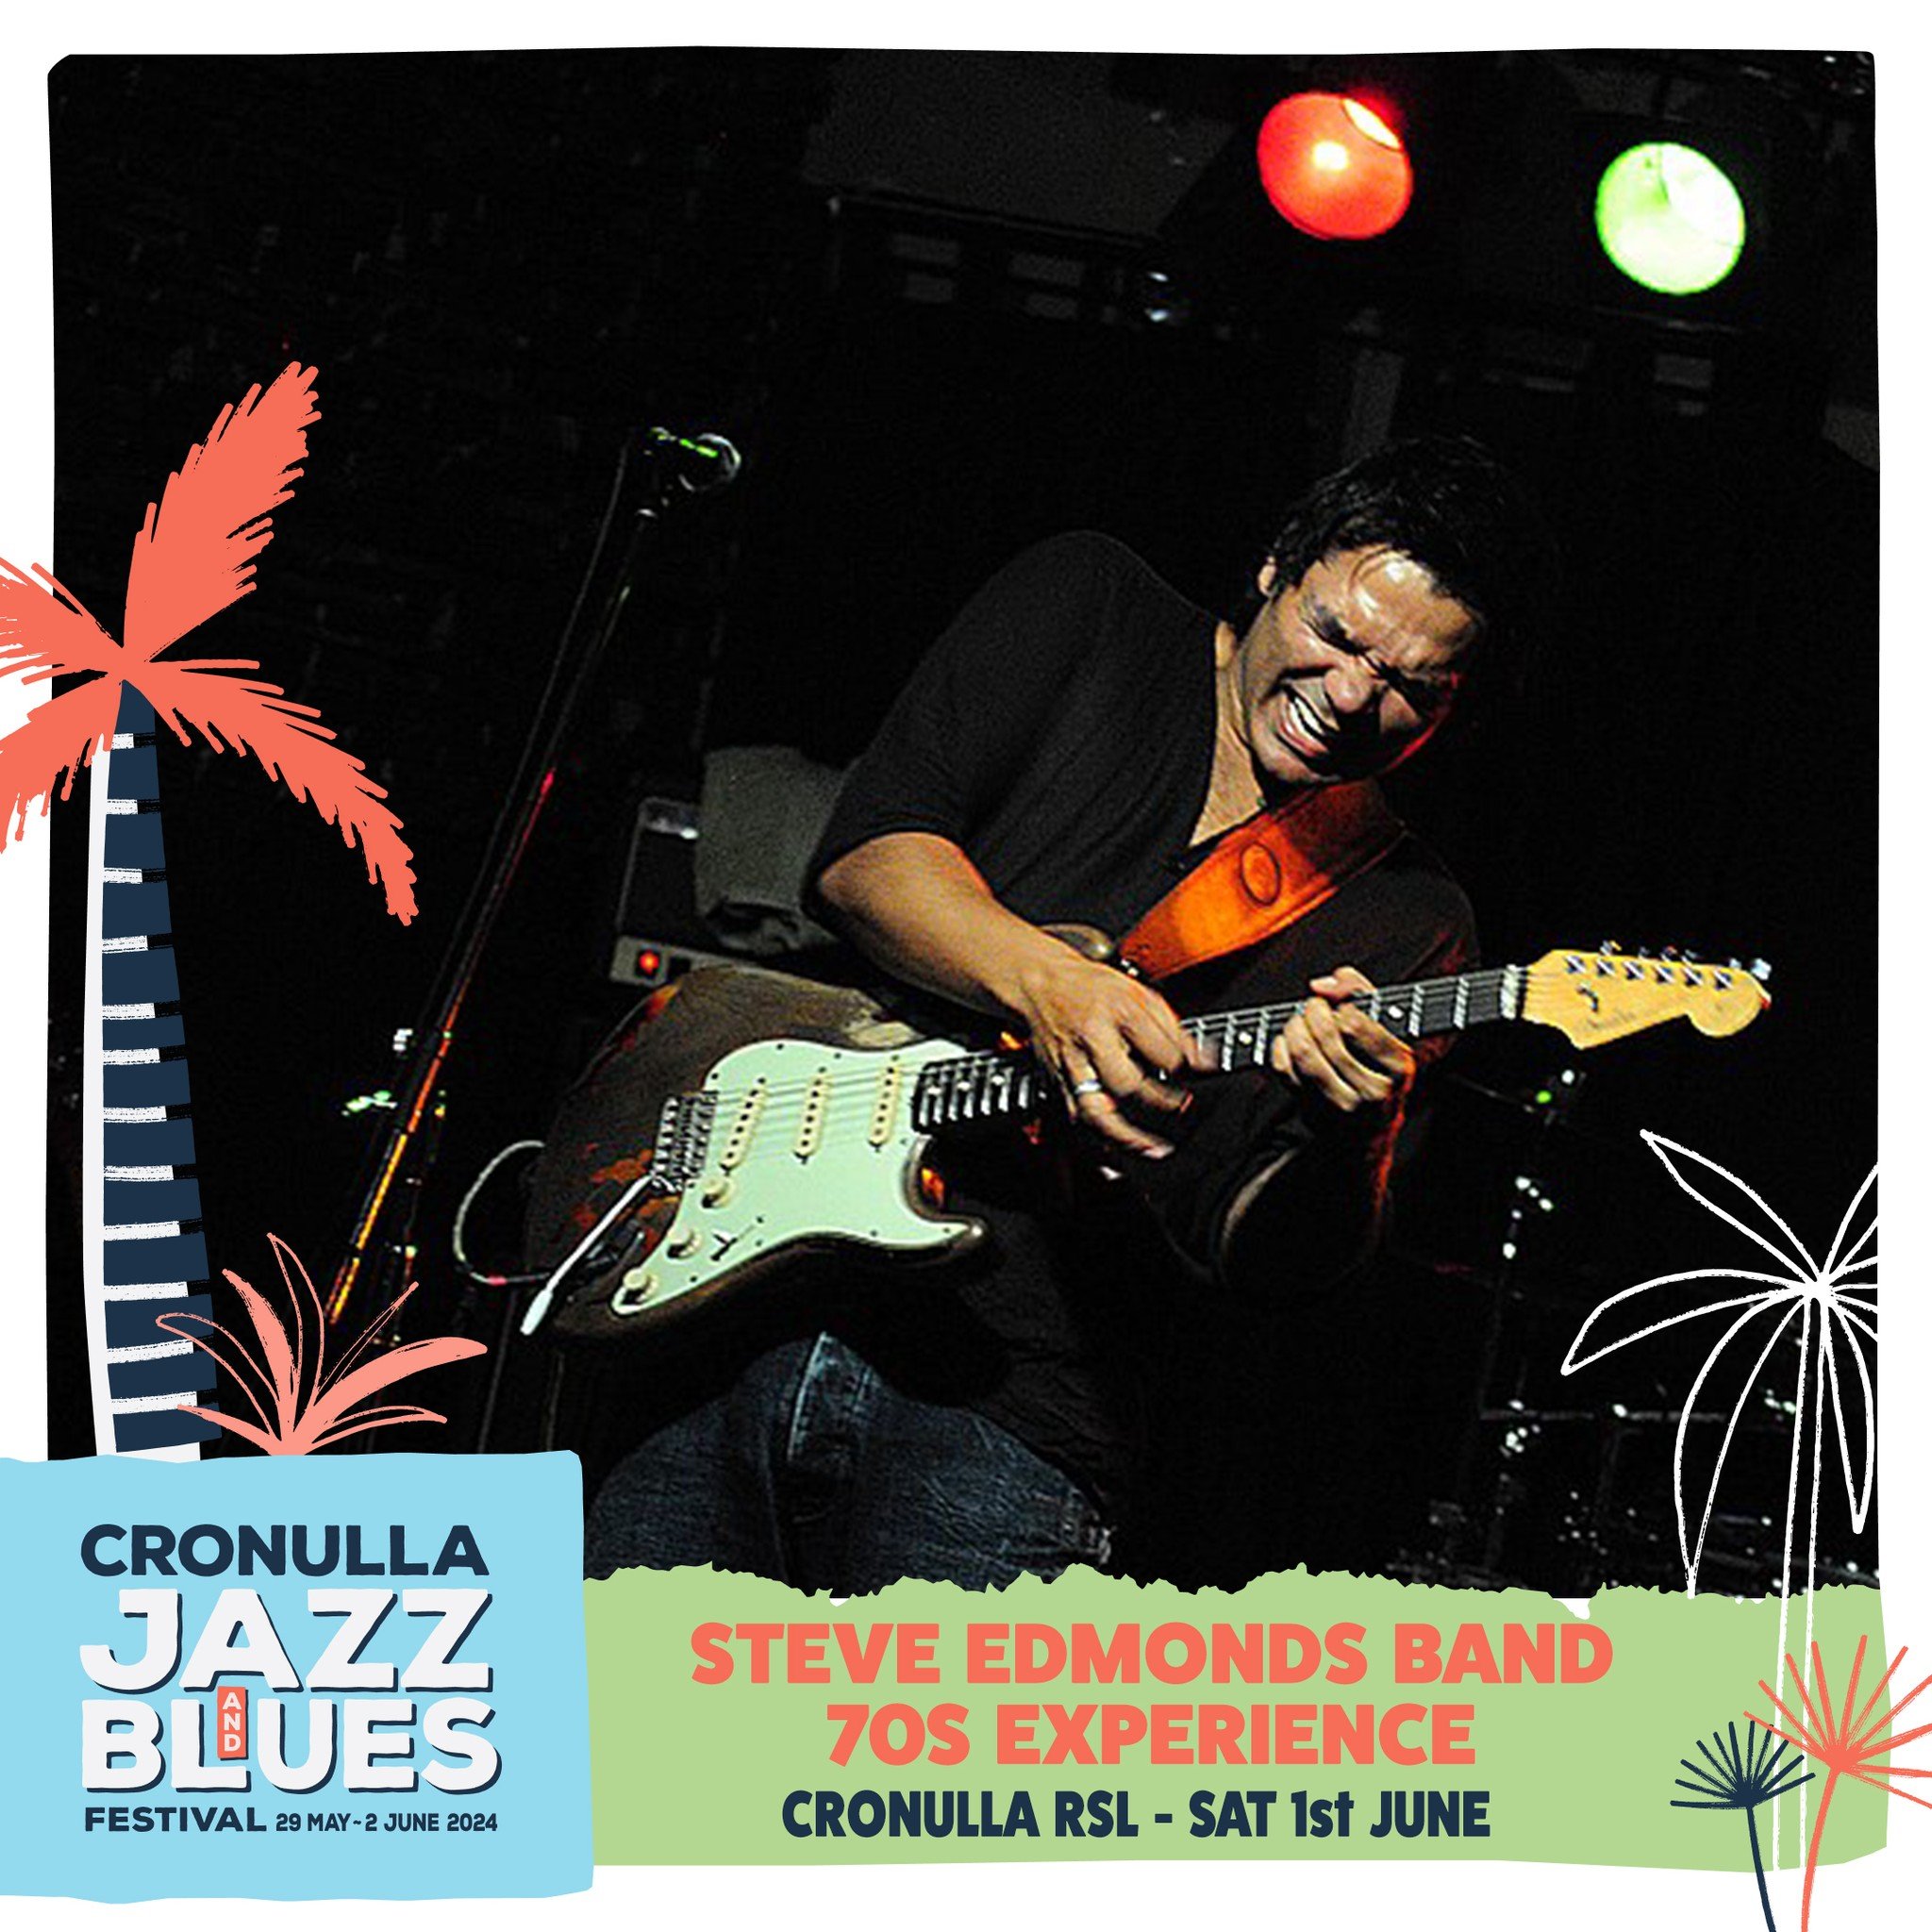 The Saturday lineup for the Jazz &amp; Blues Festival at Cronulla RSL is packed with fantastic performances. Here's the schedule:

The Steve Edmonds Band 70s Experience:

First set: 1:30 PM - 2:30 PM
Second set: 3:00 PM - 4:00 PM
Simon Kinny-Lewis Me